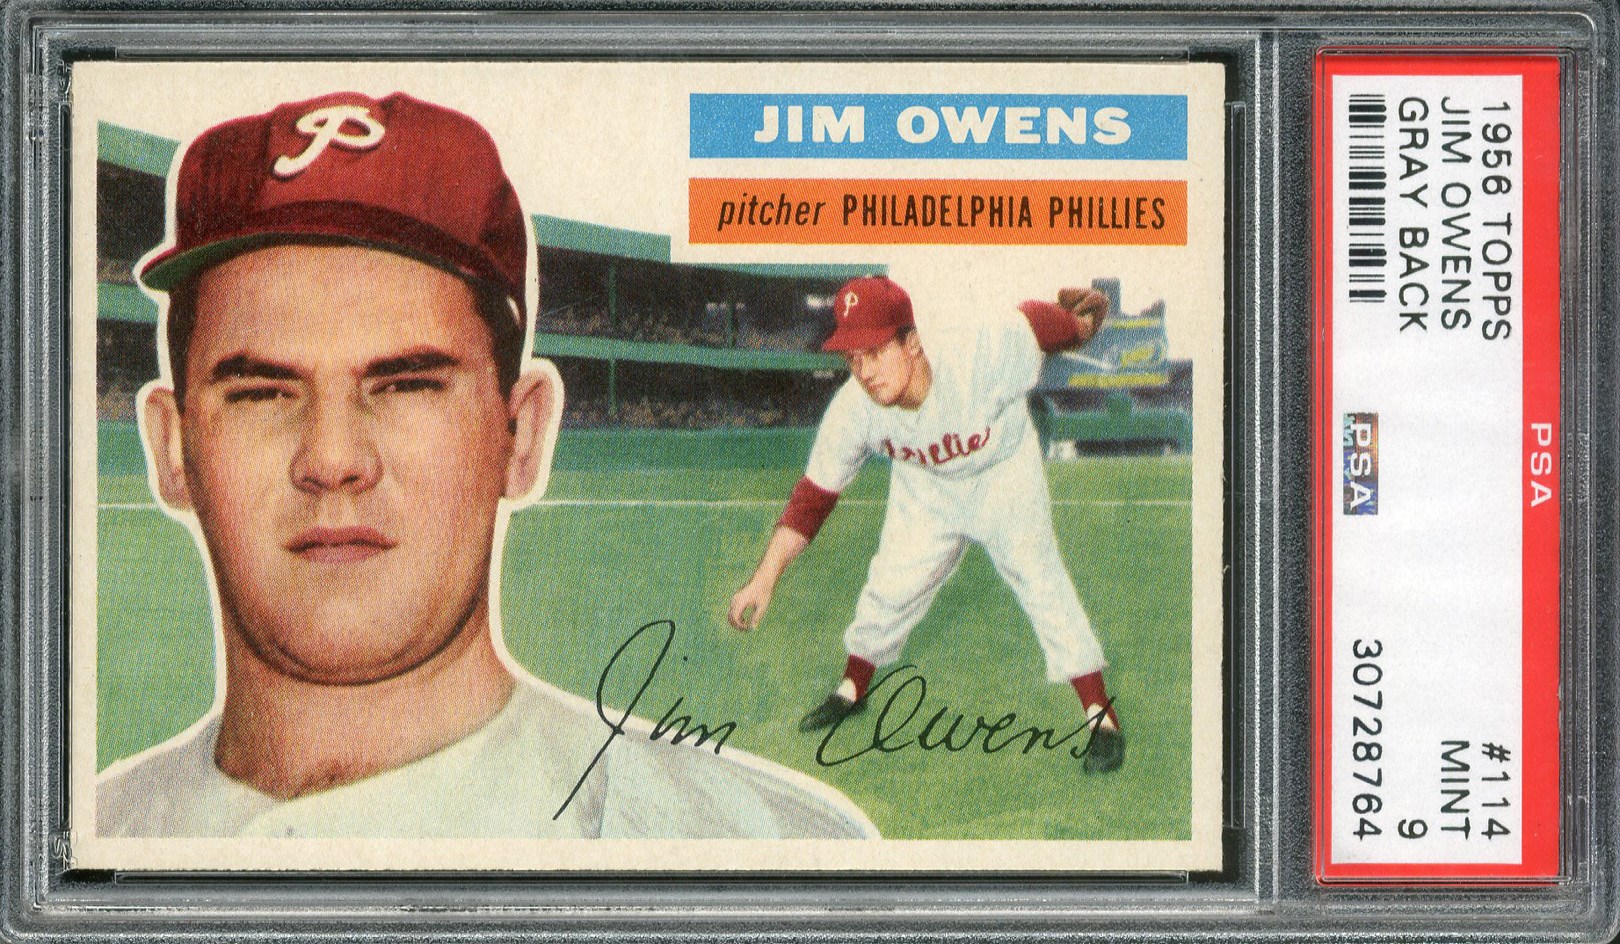 Baseball and Trading Cards - 1956 Topps #114 Jim Owens Gray Back PSA MINT 9